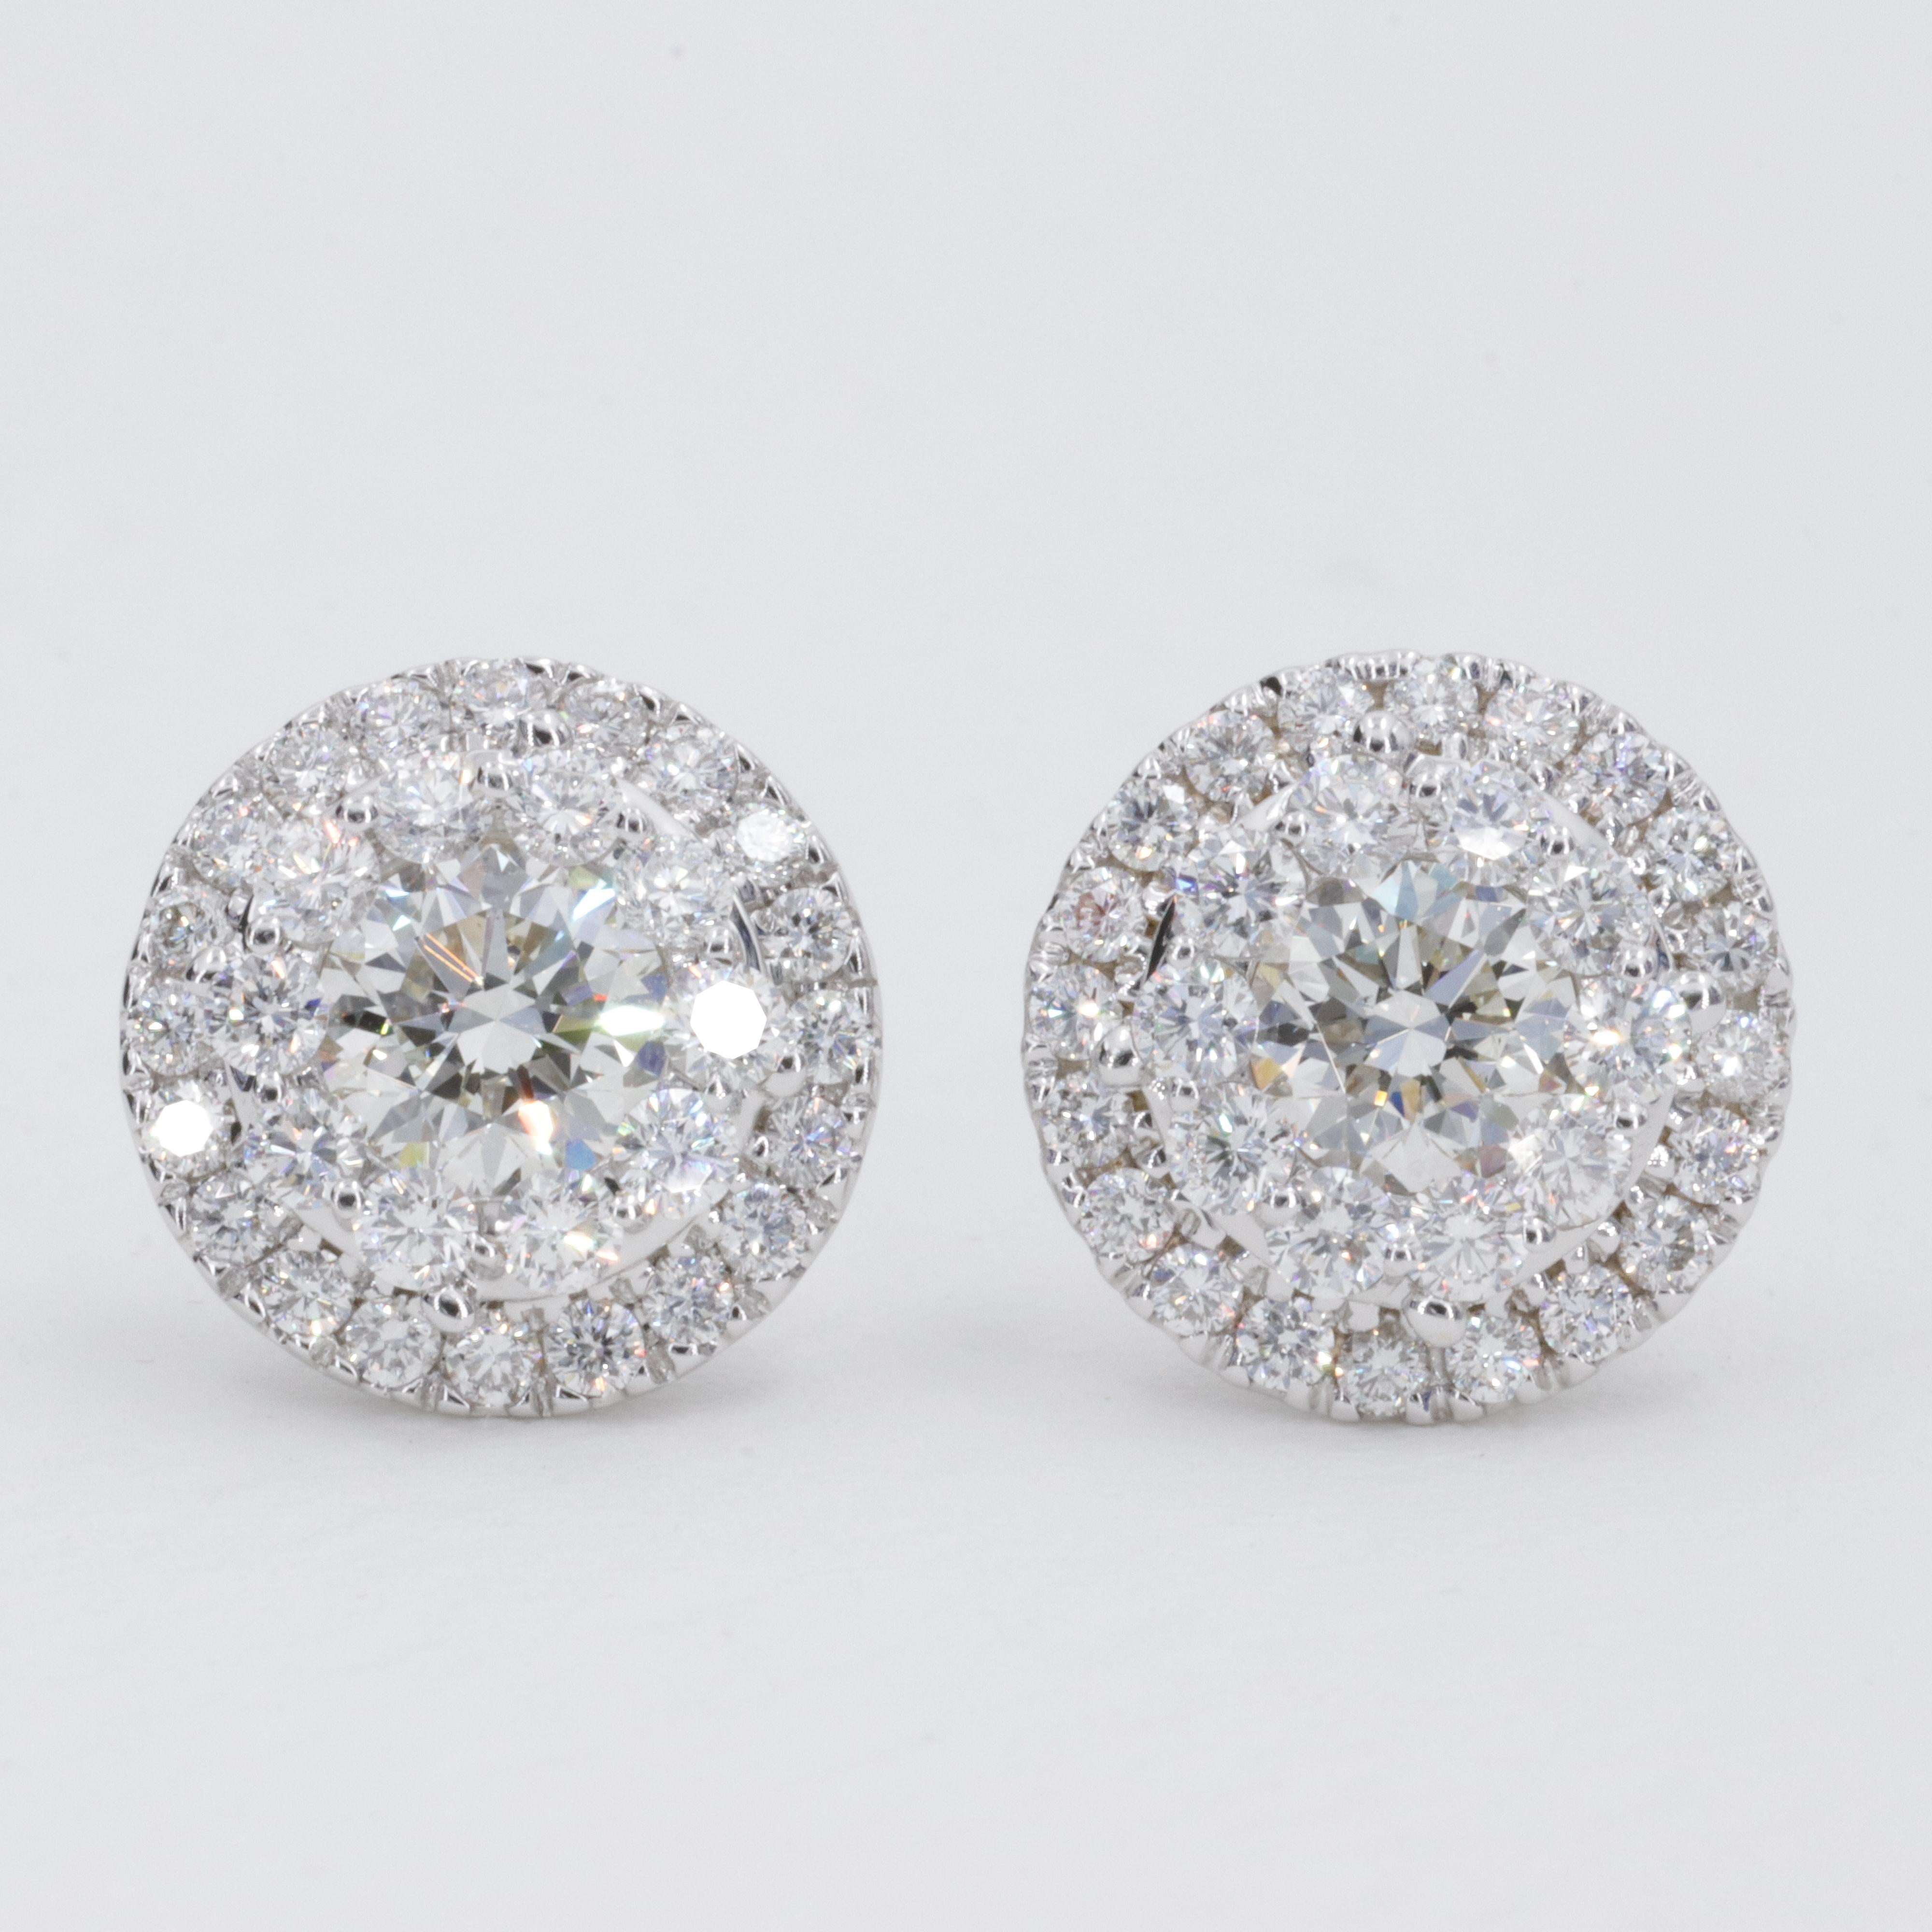 A beautiful pair of round brilliant cut natural diamond halo stud earrings weighing approximately 2.50 carats. The diamonds are finely cut and proportioned and give off an incredible brilliance. 

The center diamonds are uniquely set behind the